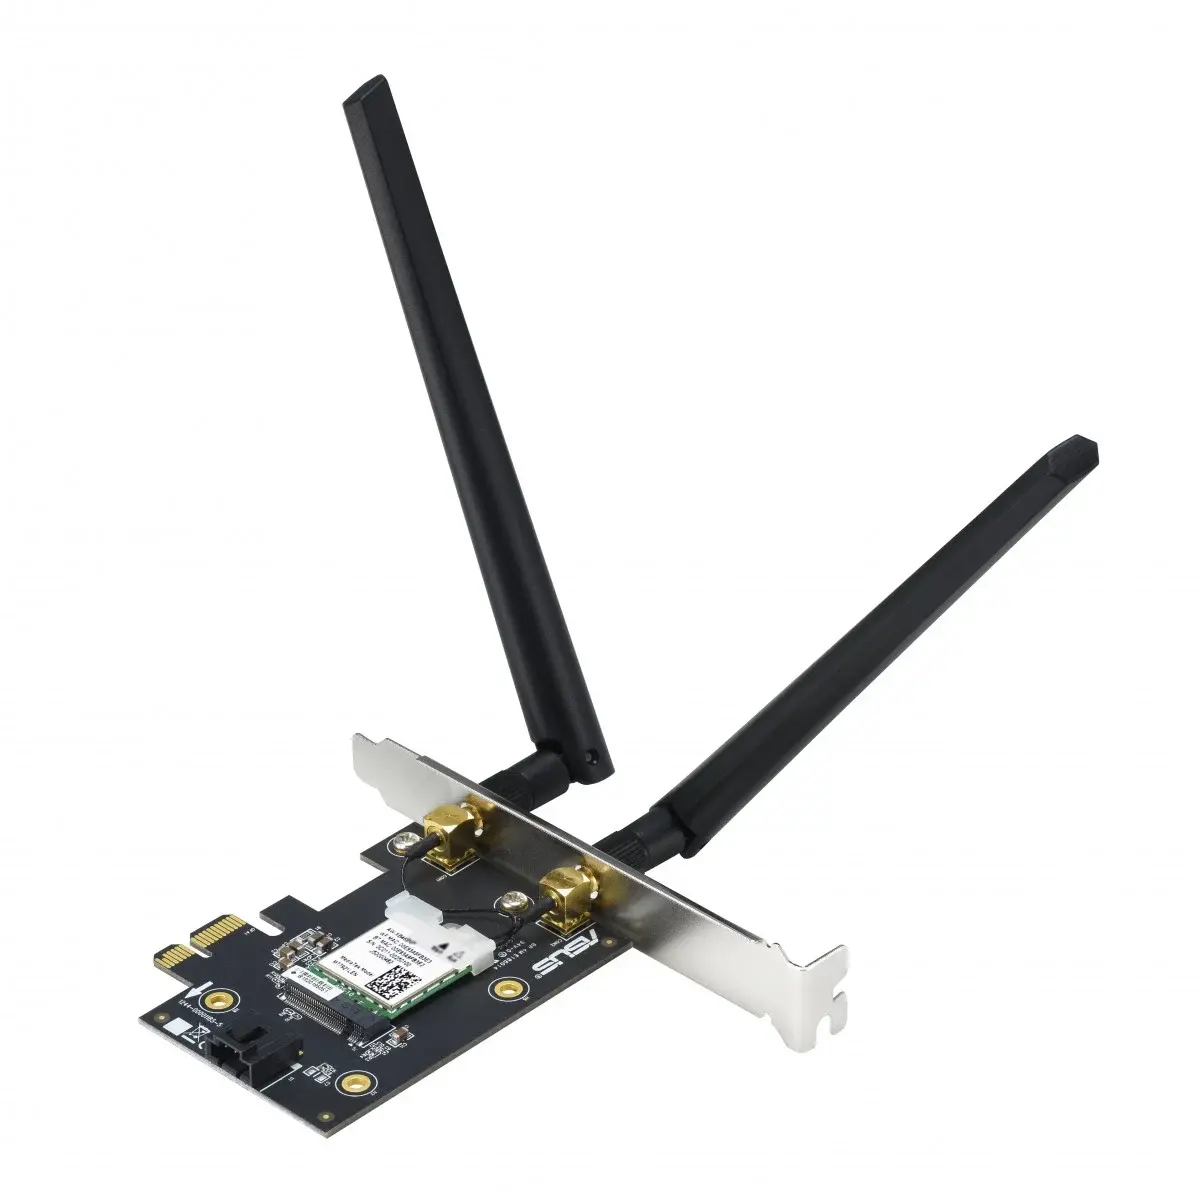 ASUS Wi-Fi 6 802.11ax AX1800 Dual-Band Bluetooth 5.2 PCIe WiFi Adapter - image 2